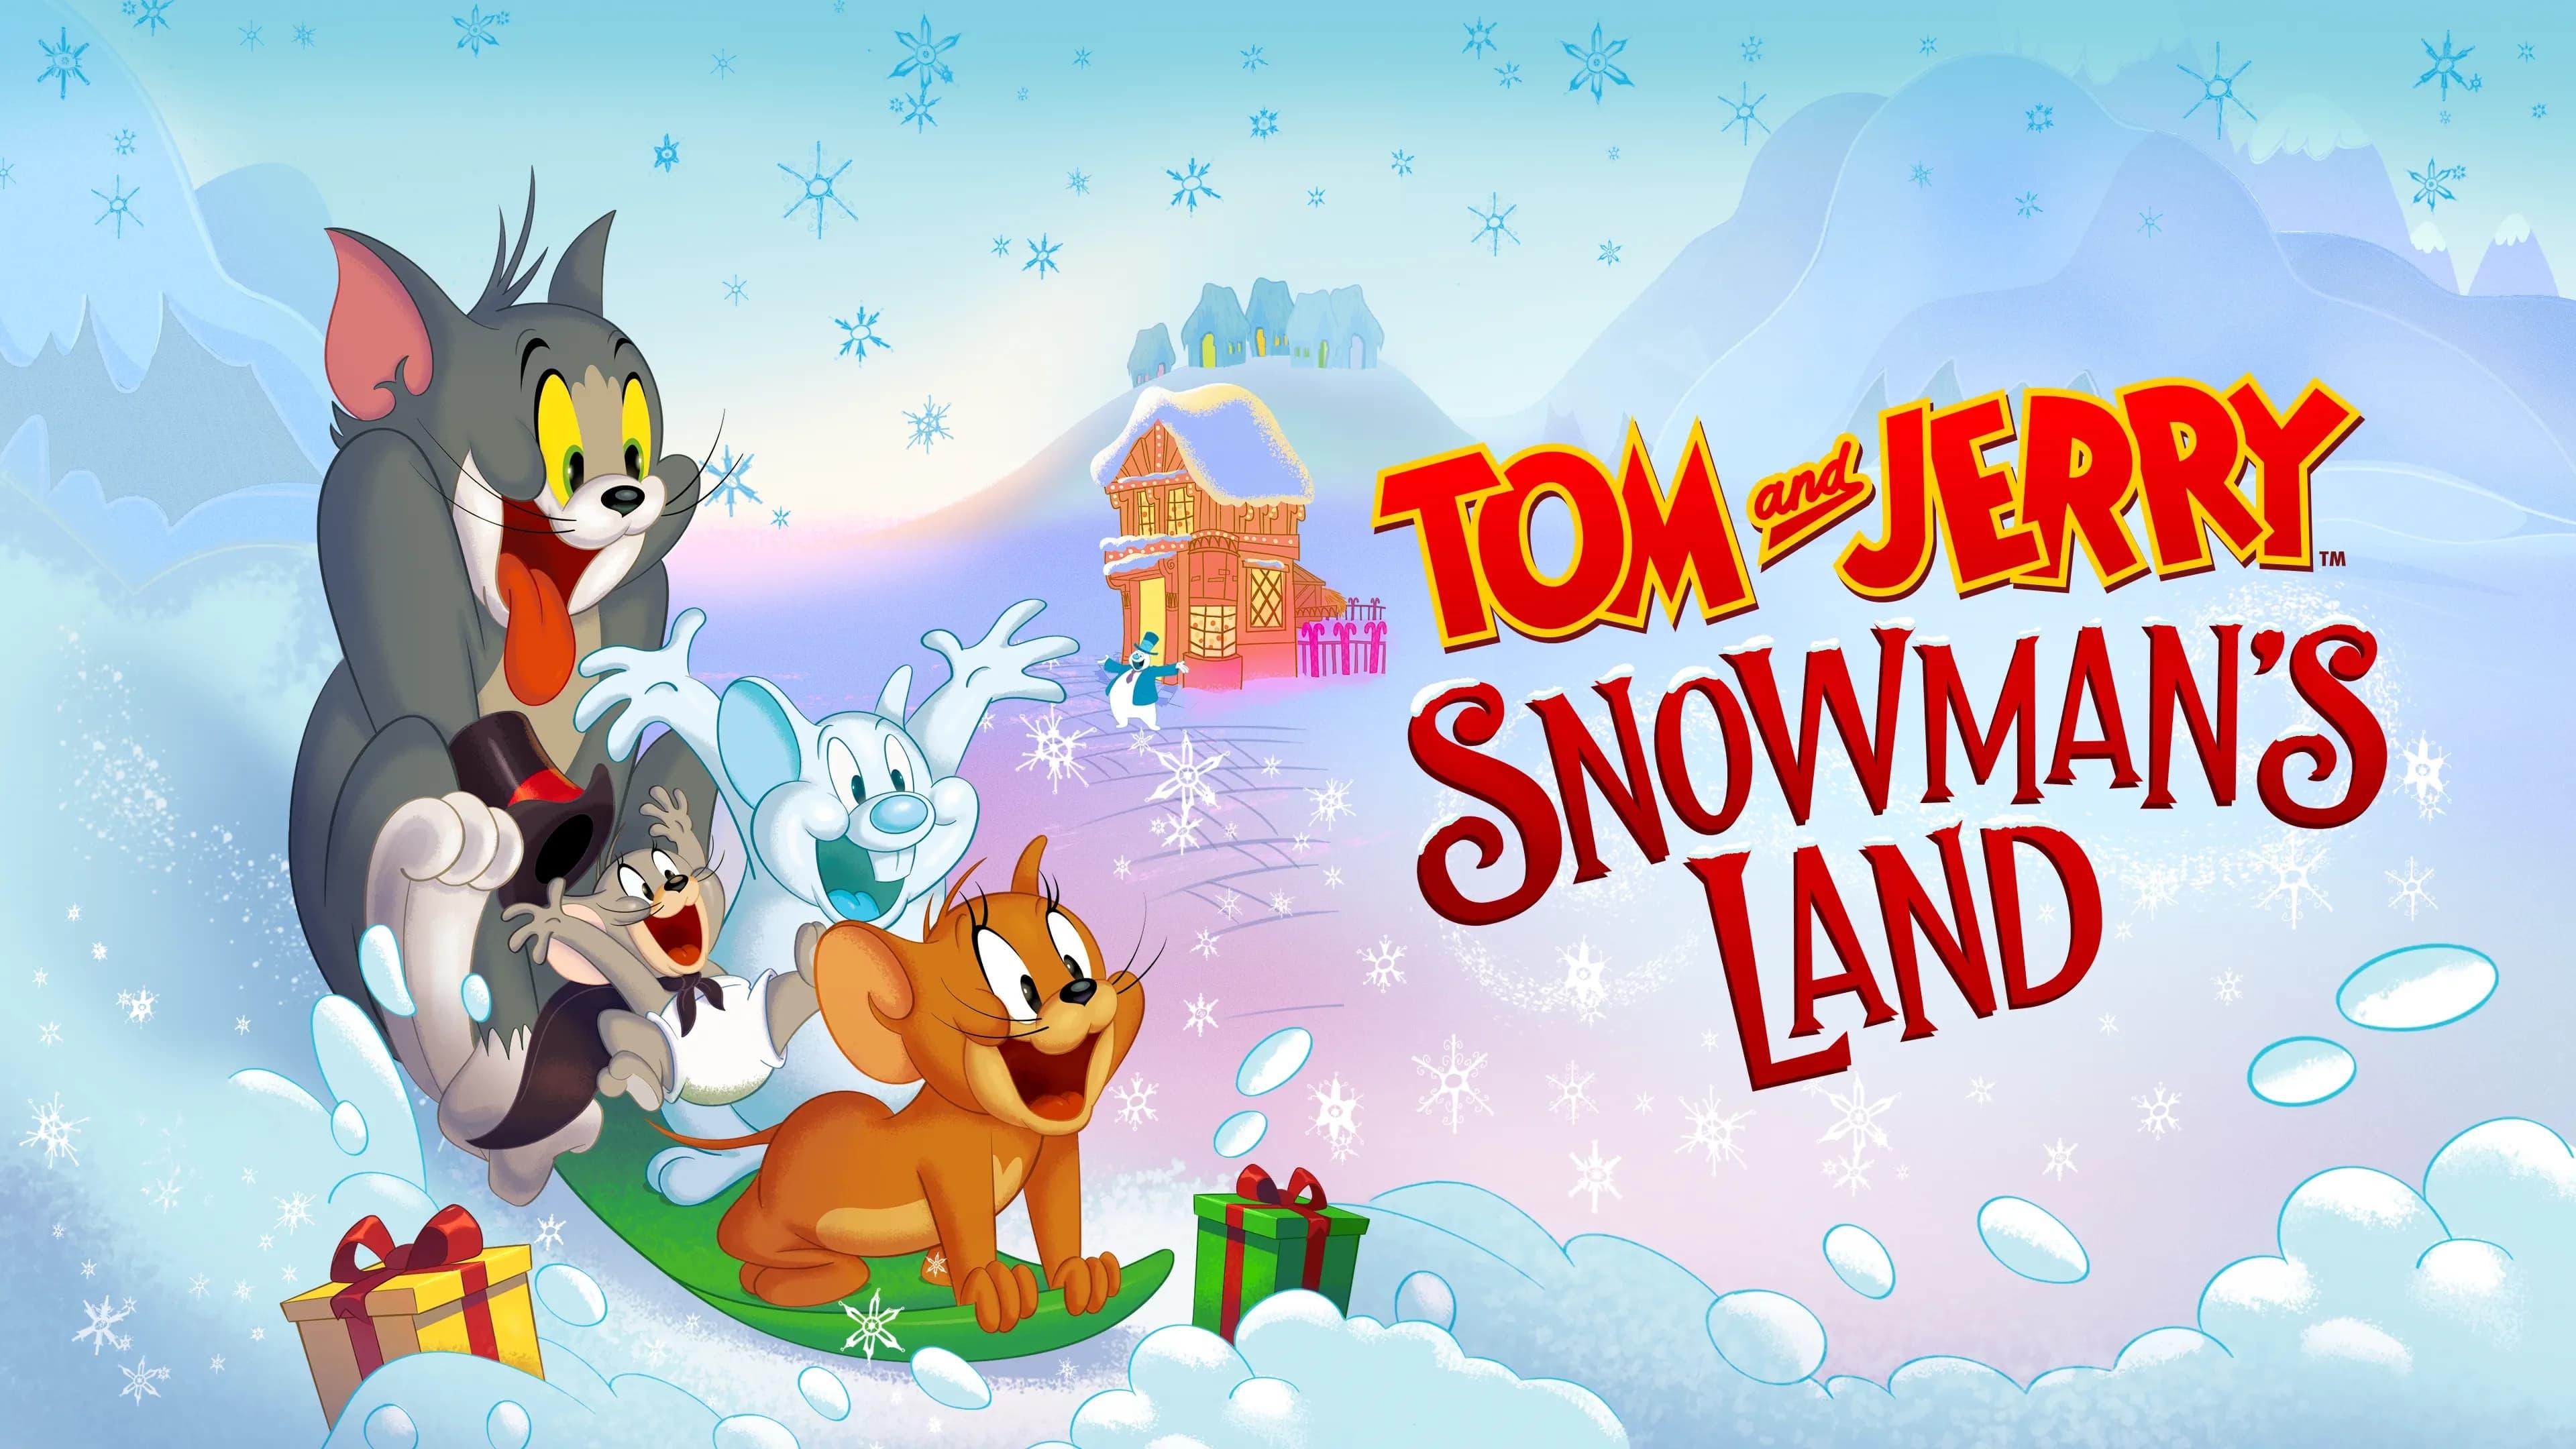 Tom and Jerry Snowman's Land backdrop